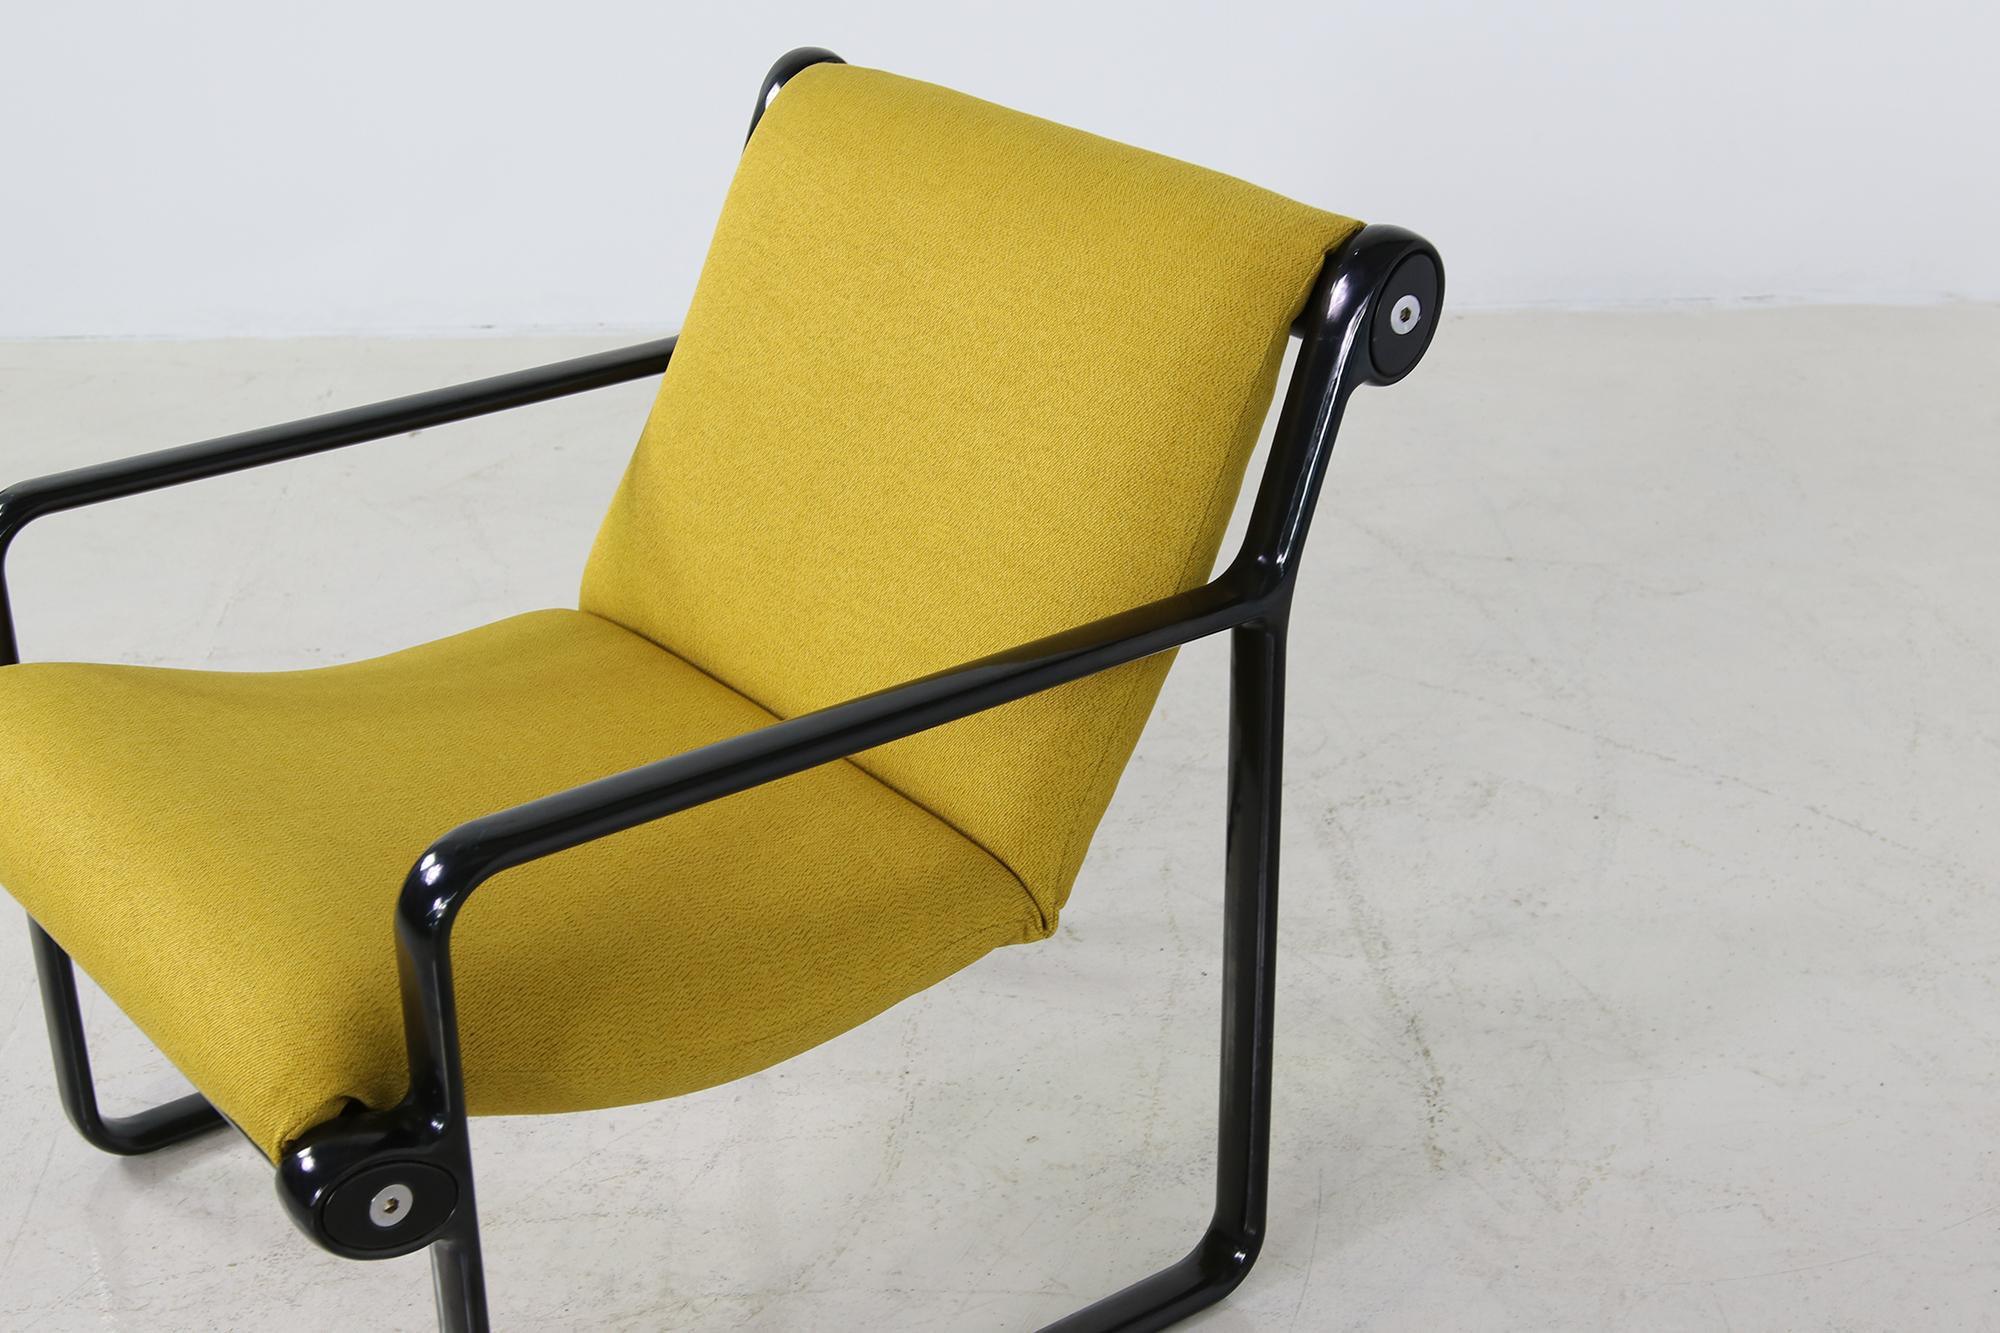 Pair of 1970s Lounge Chairs by Hannah & Morrison for Knoll Dark Yellow & Black In Good Condition For Sale In Hamminkeln, DE